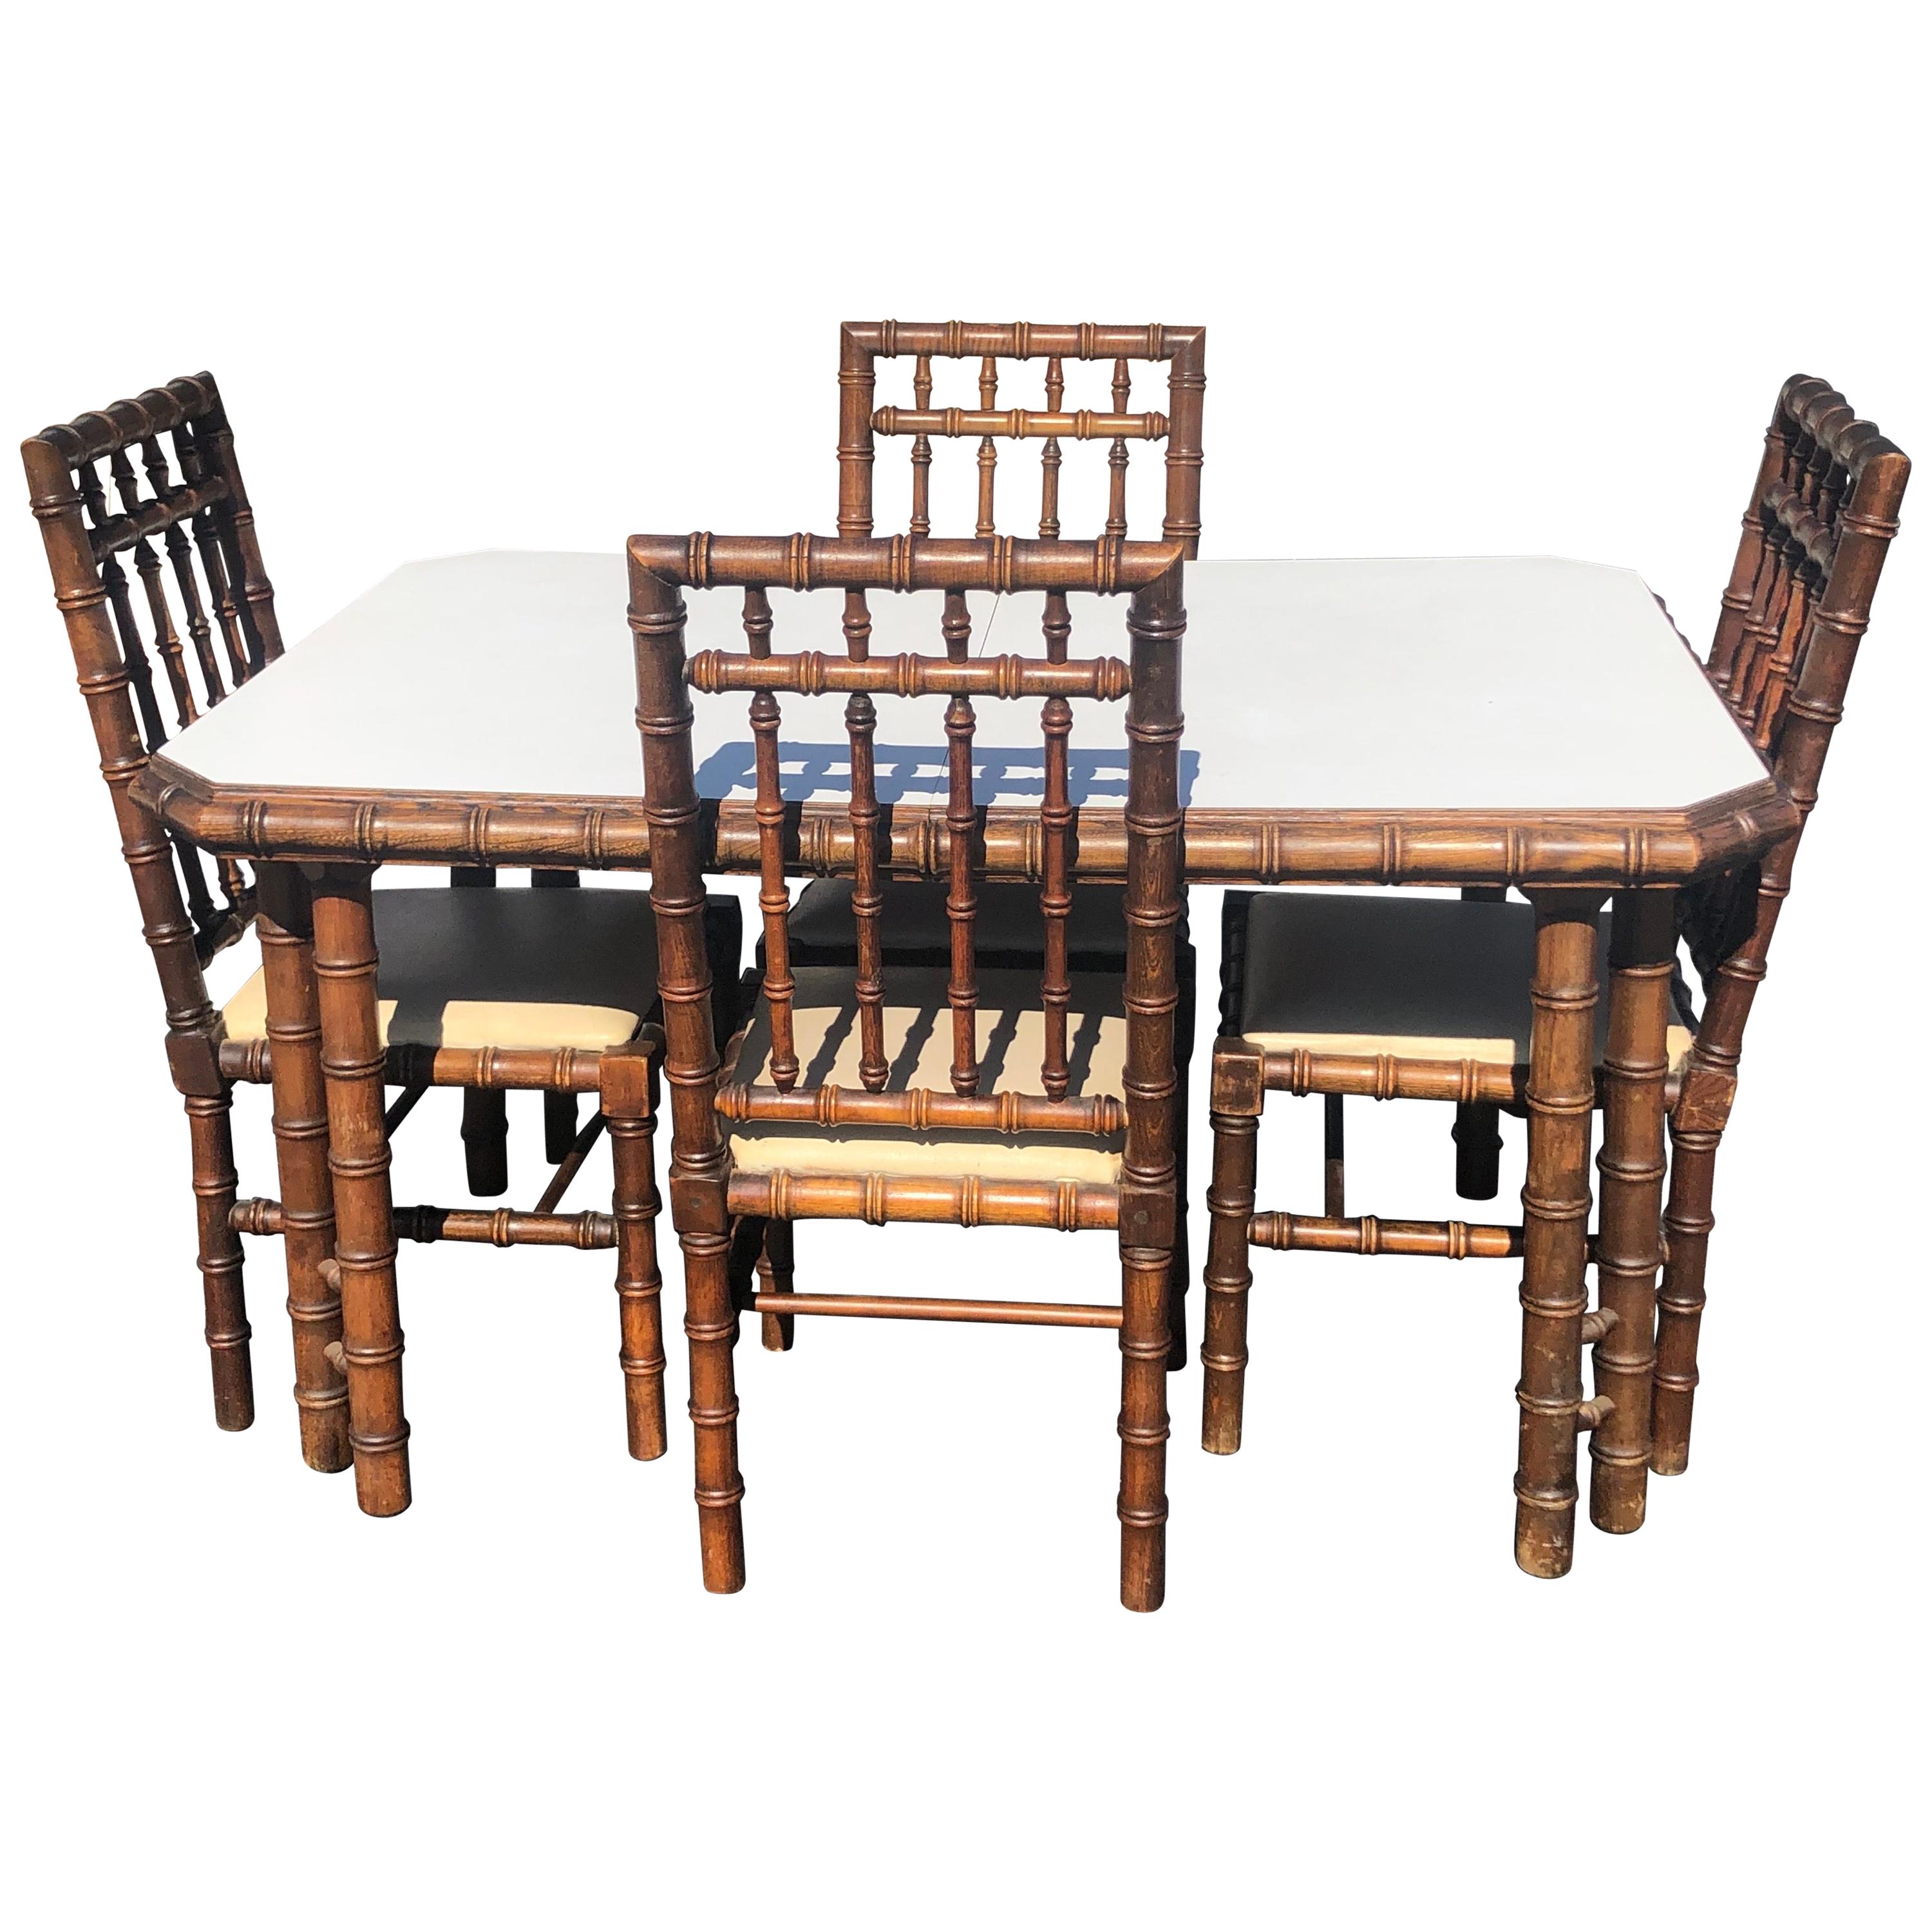 Faux Bamboo Table with Four Matching Chairs